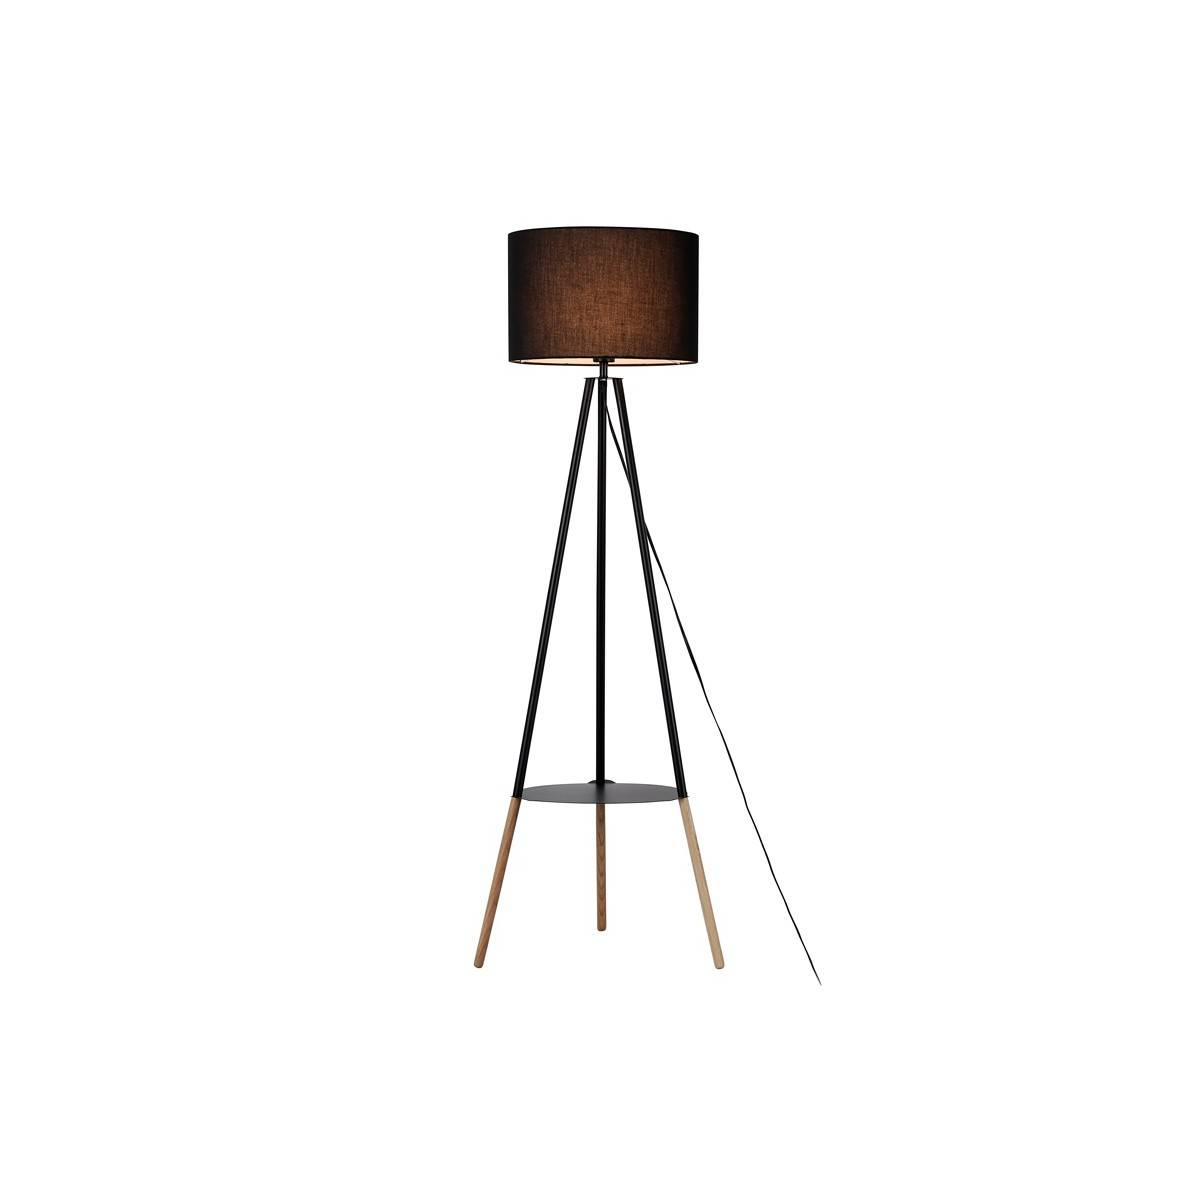 Floor Lamp with Tripod or Table "Mandí" in Nordic black wood